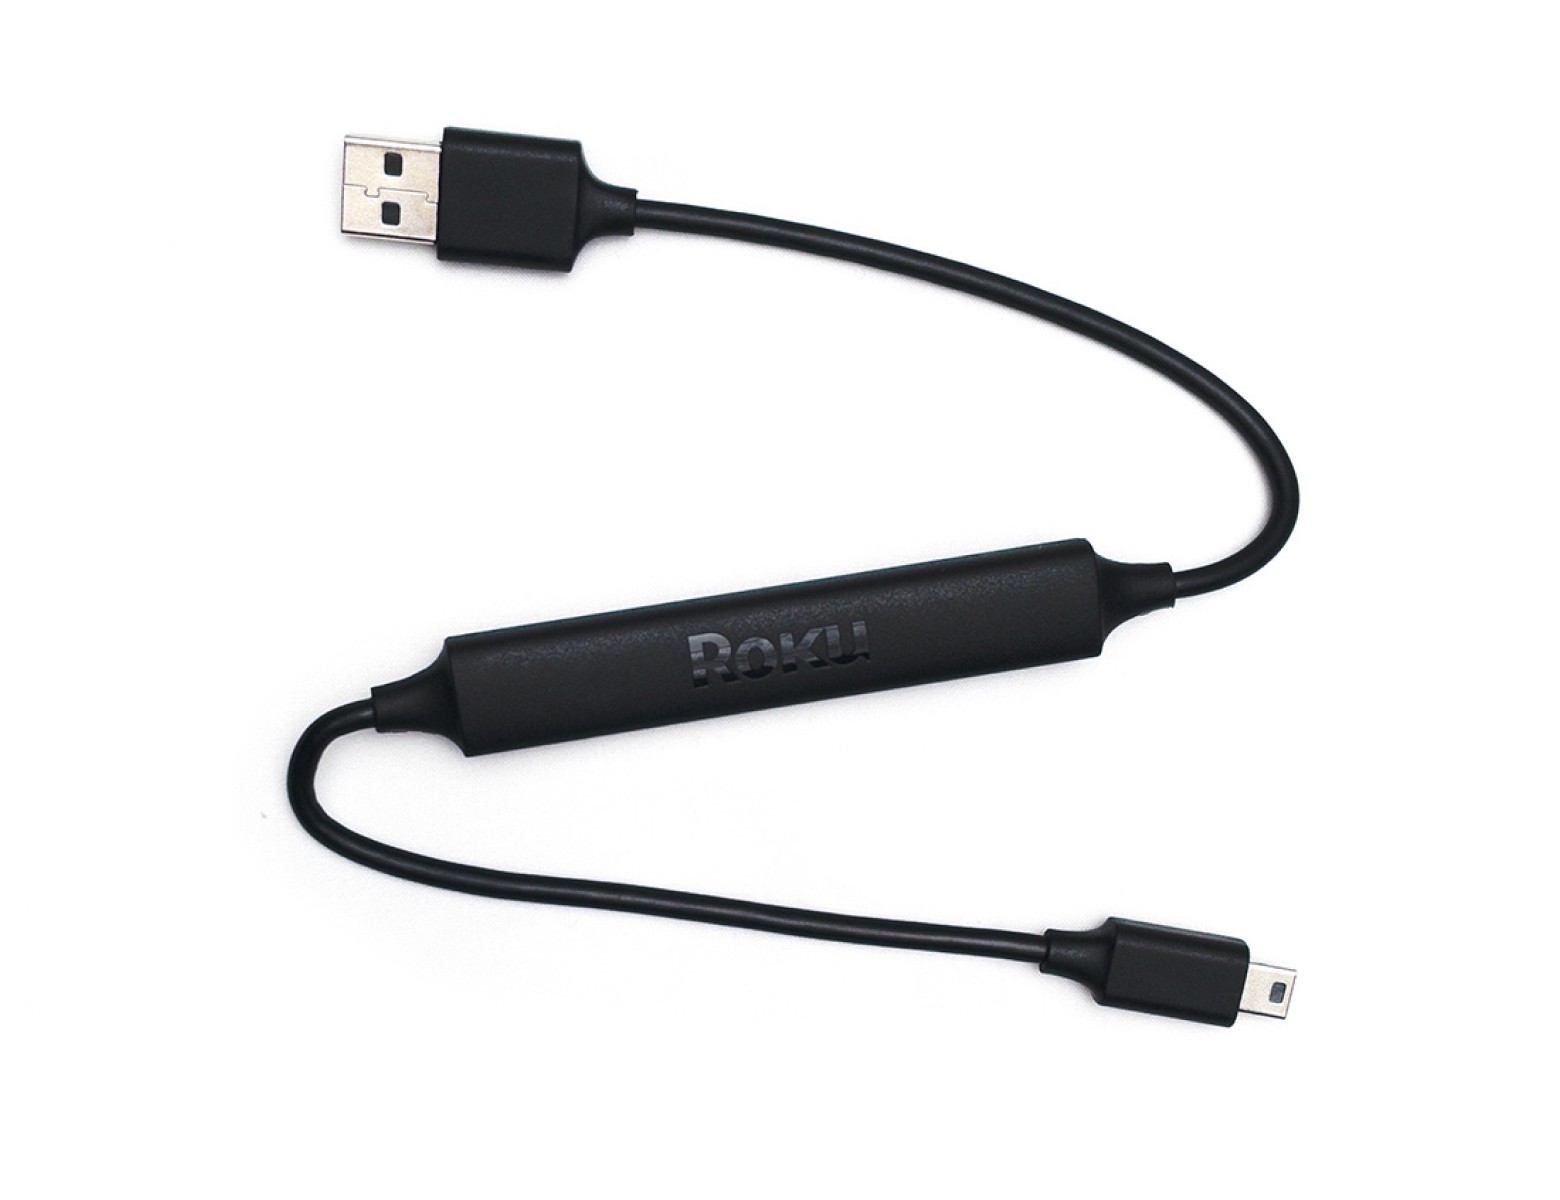 USB Power Cable with Wi-Fi® Receiver (Models 3810 & 3811) |